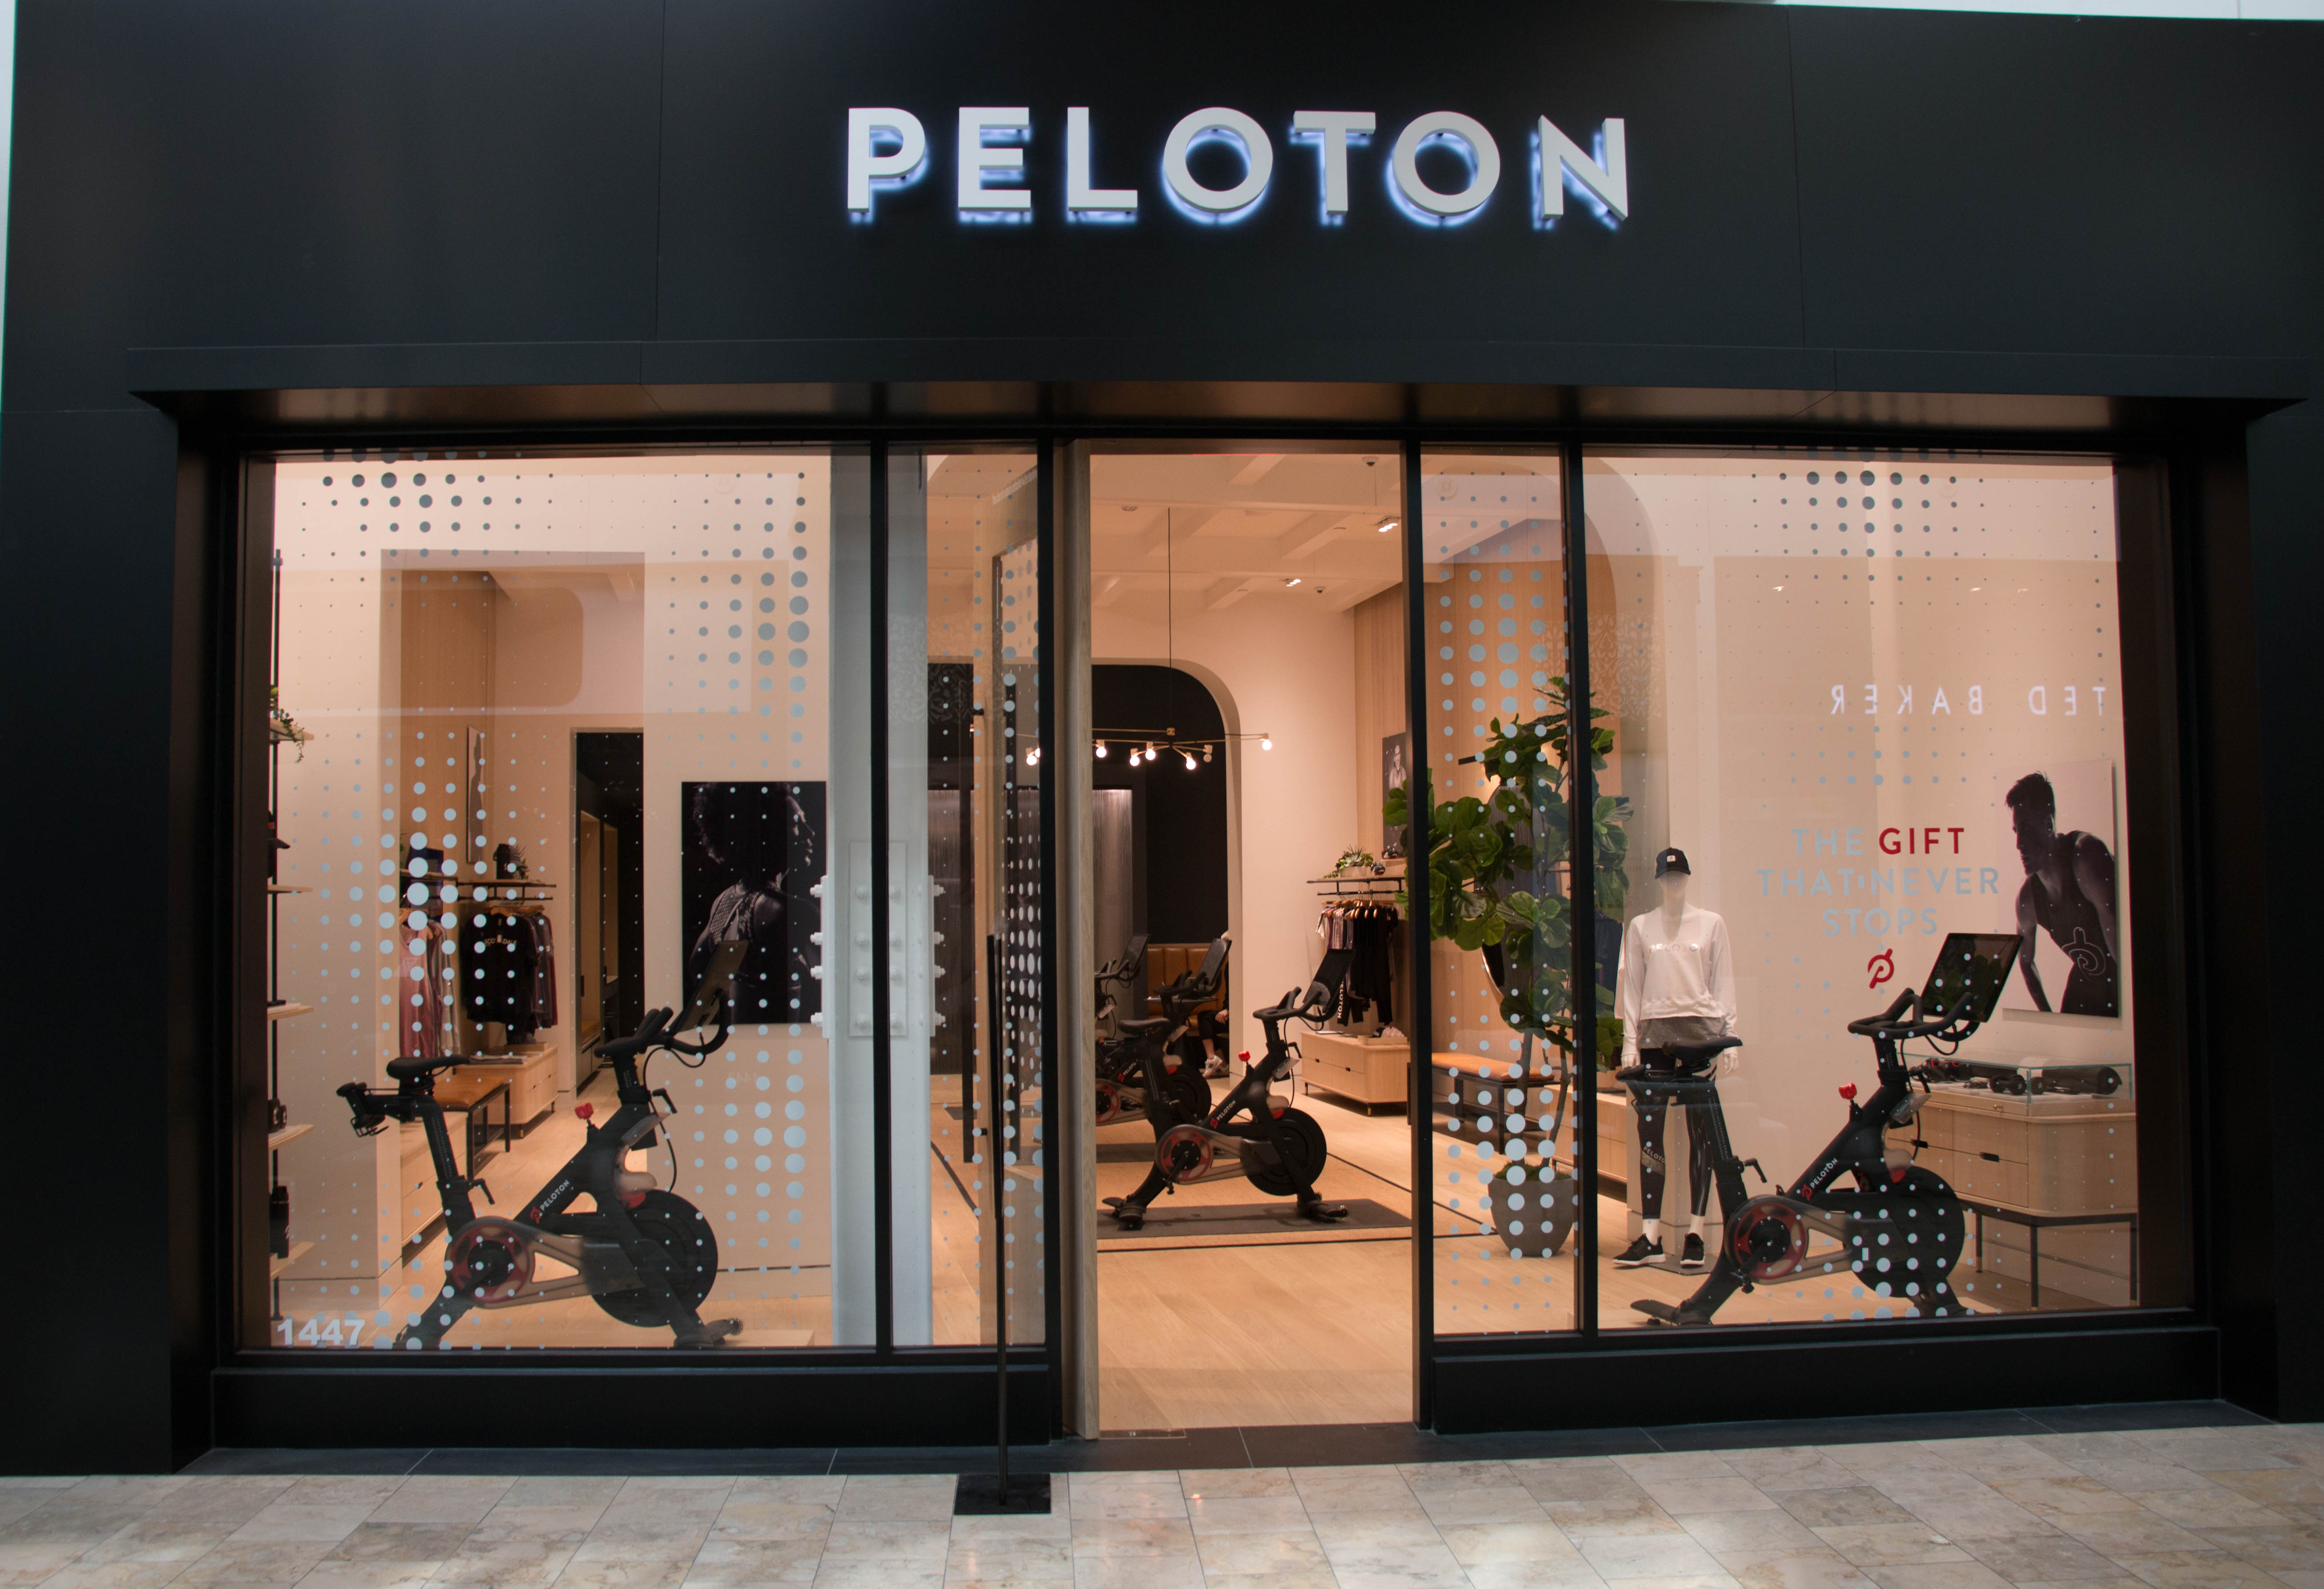 Peloton, which sells exercise bikes and equipment, will open a call center in Tempe.